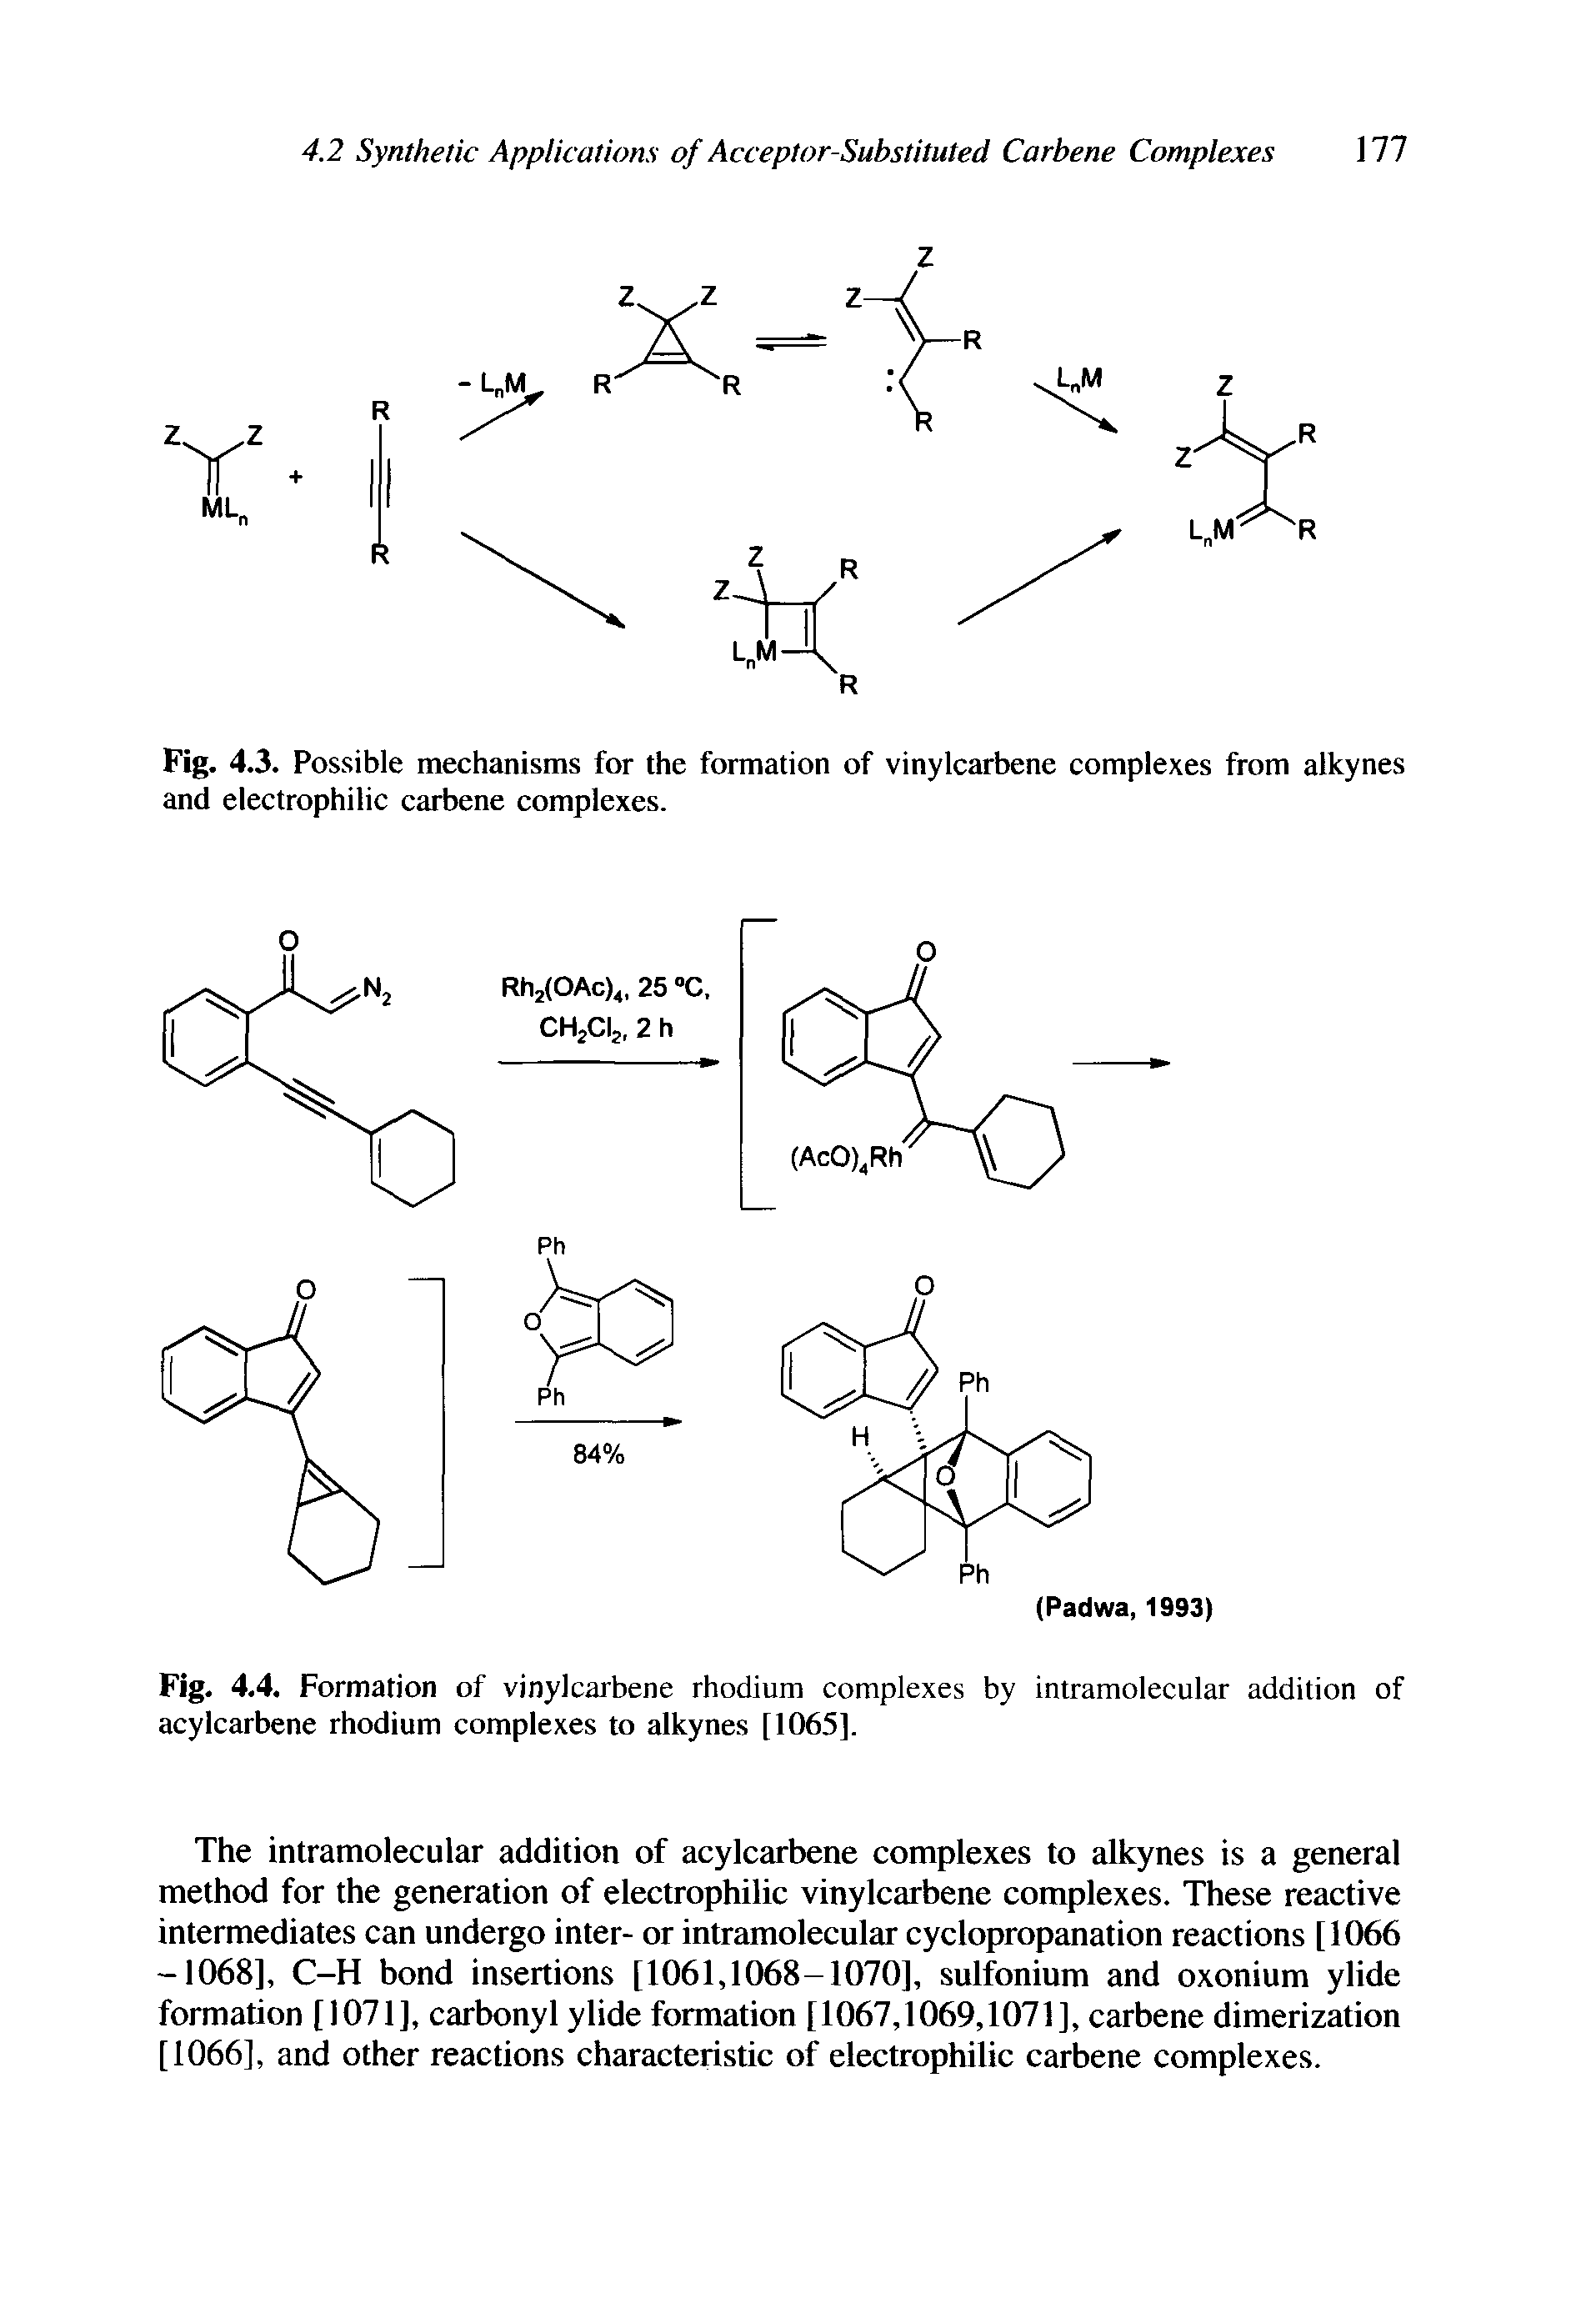 Fig. 4.3. Possible mechanisms for the formation of vinylcarbene complexes from alkynes and electrophilic carbene complexes.